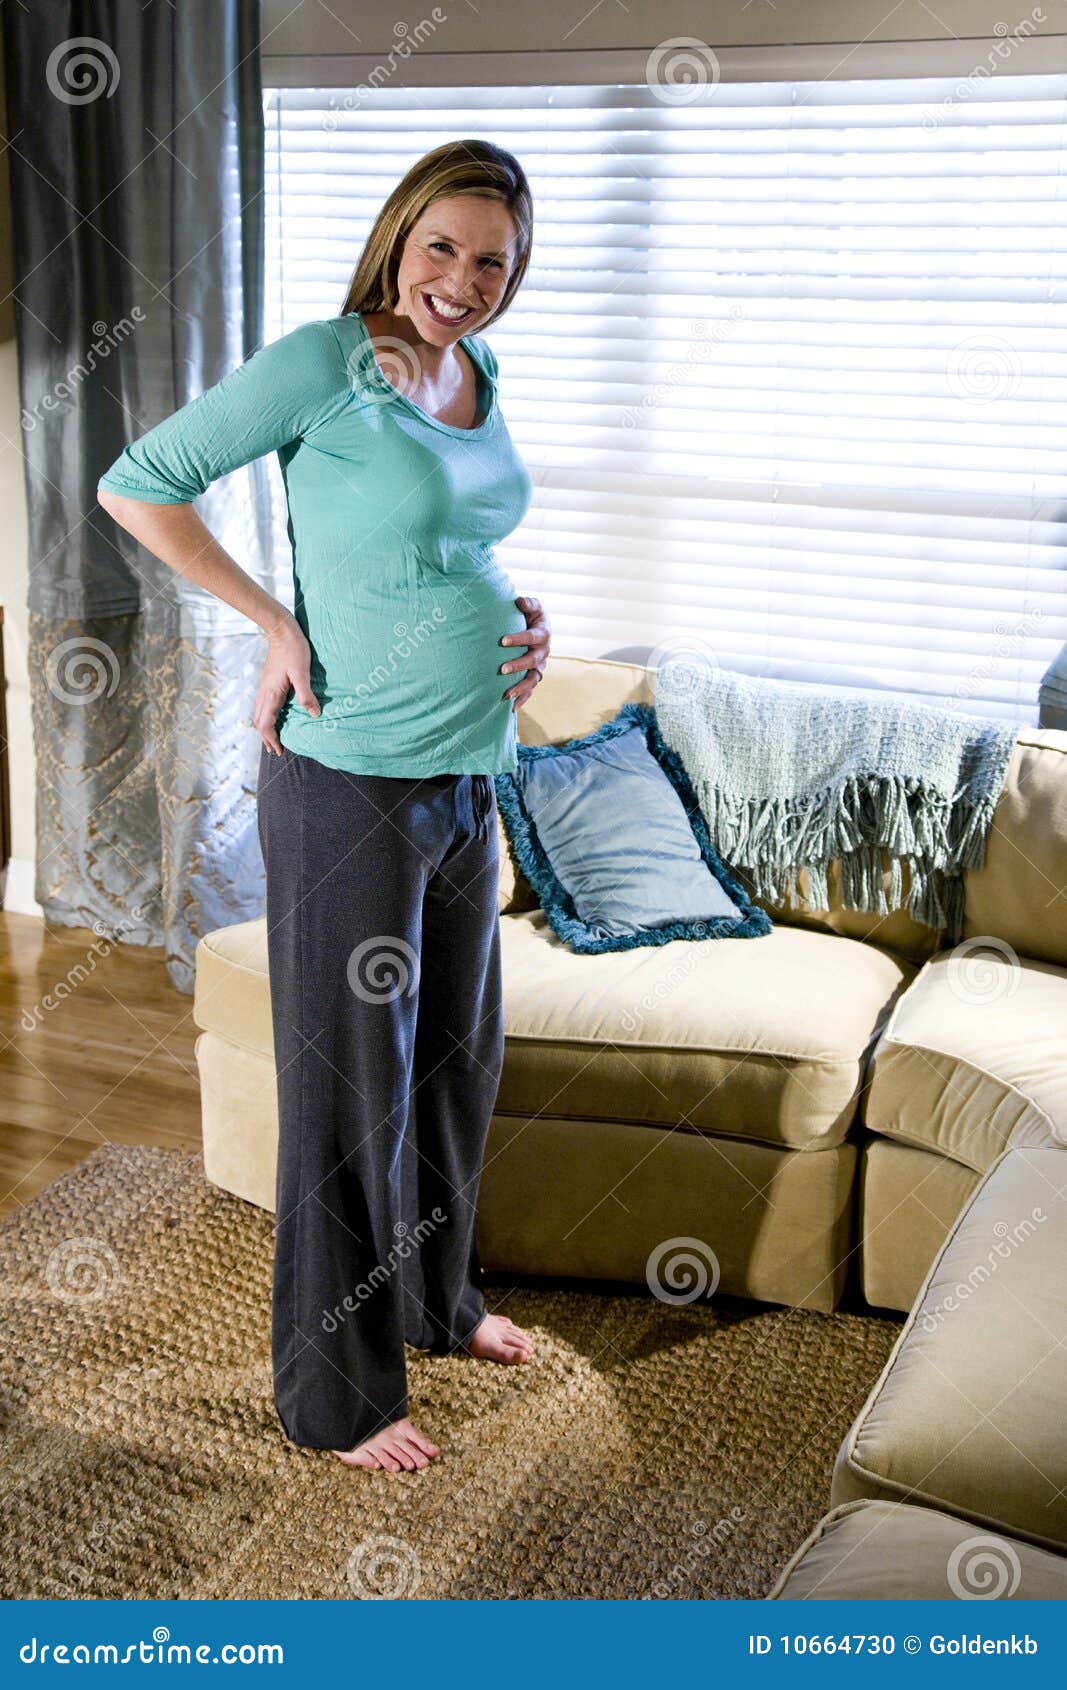 Pregnant Woman Standing In Living Room Stock Photo - Image of pregnancy